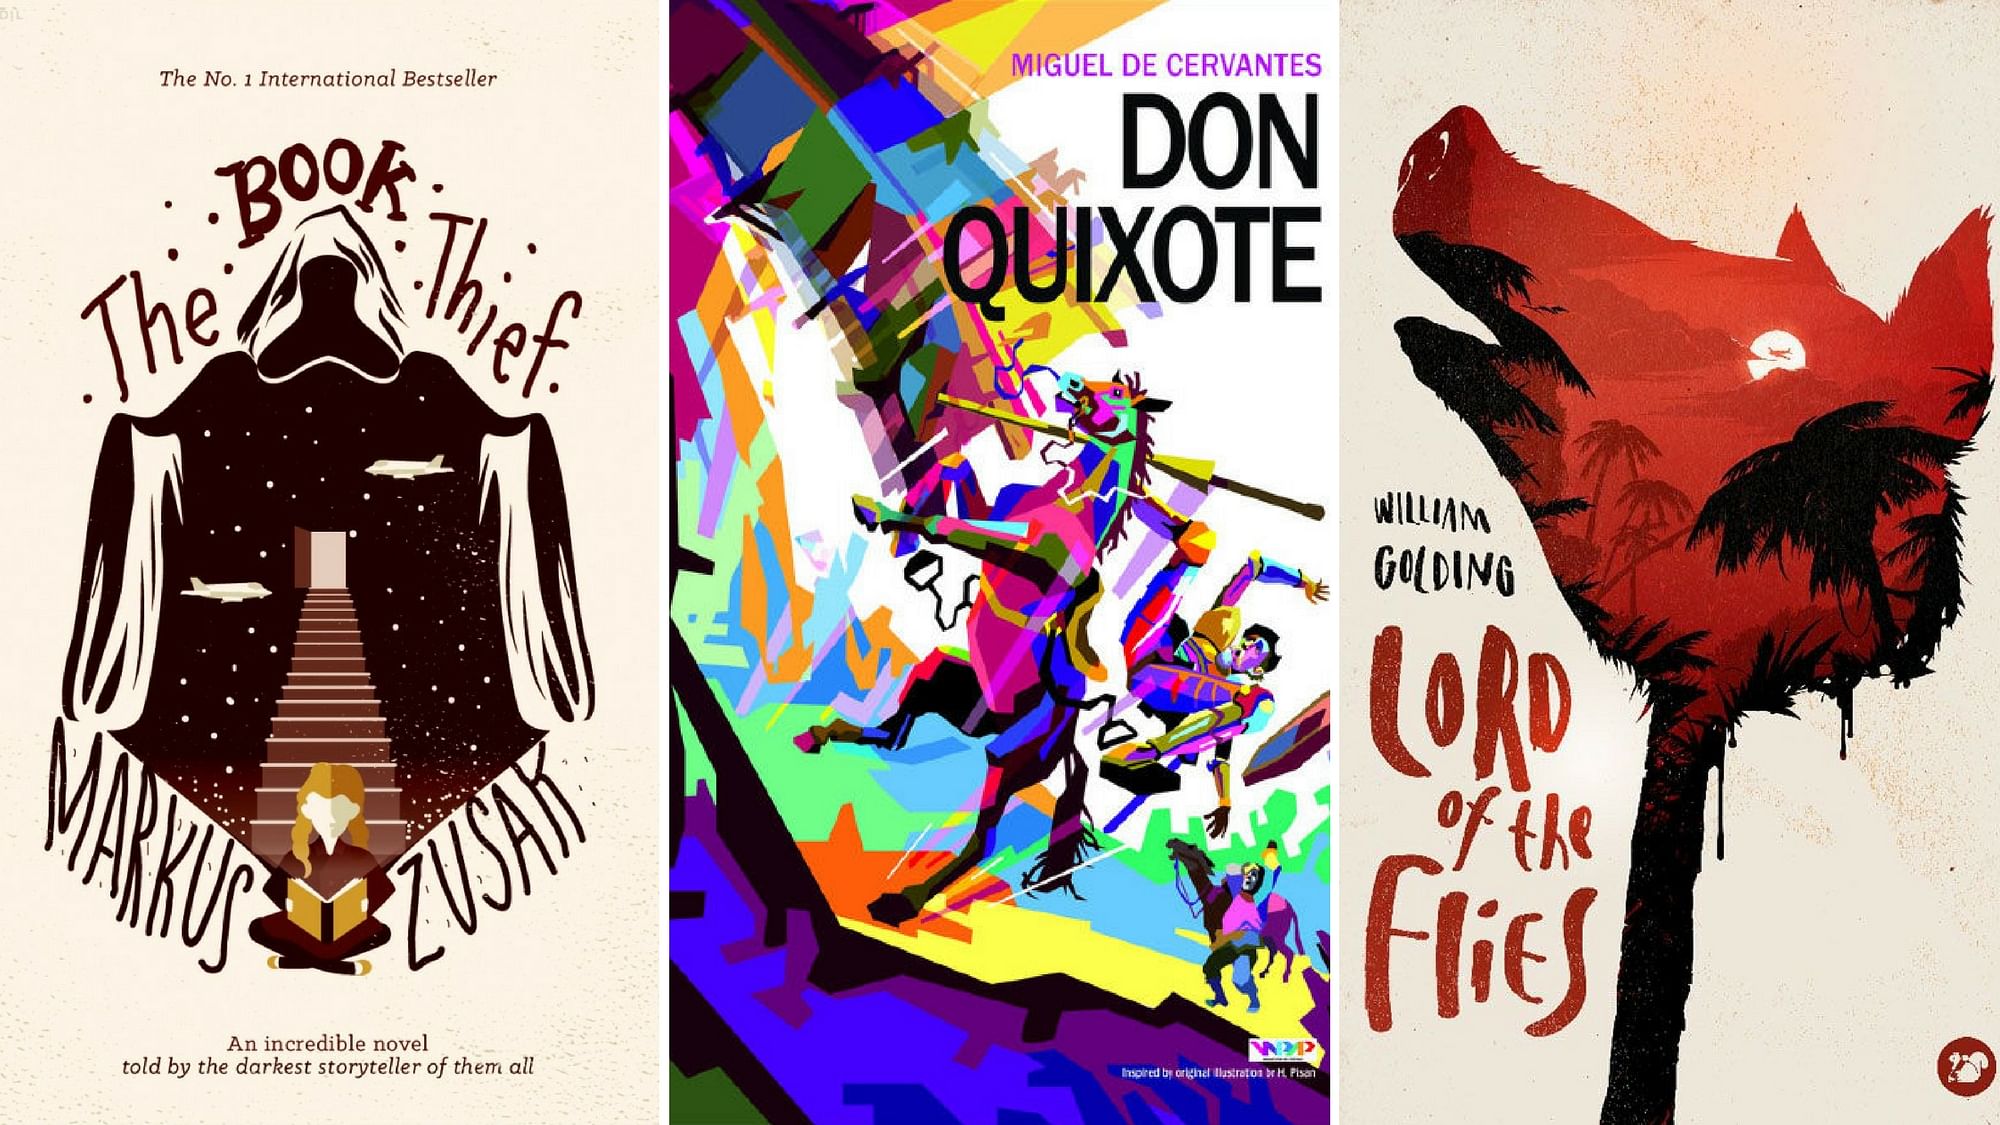 These are a few of the most creative book covers that have fired our imaginations in the past several years.